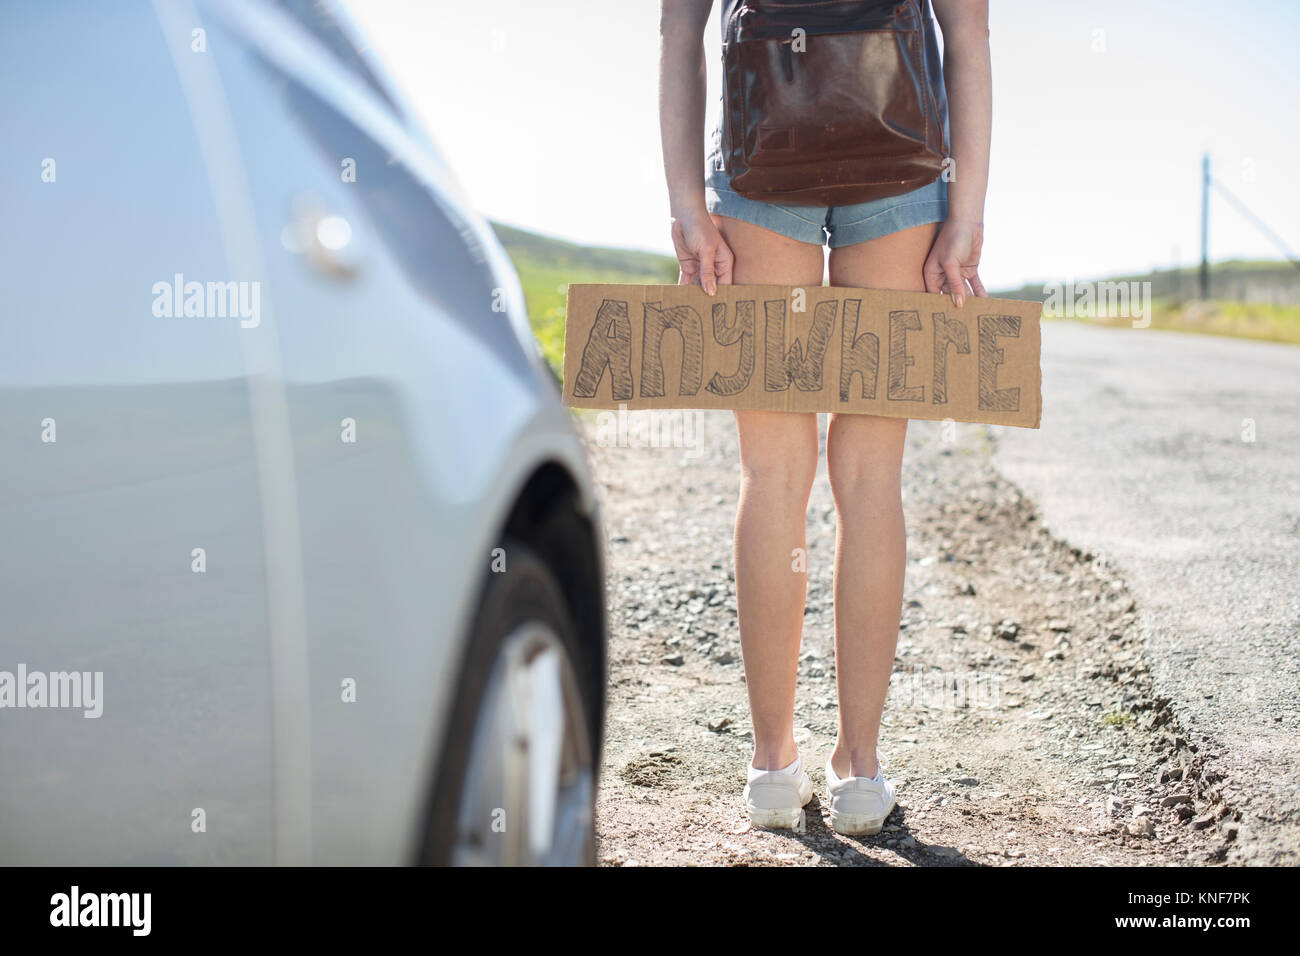 Young woman standing beside car, holding hitch-hiking sign saying 'anywhere', low section Stock Photo